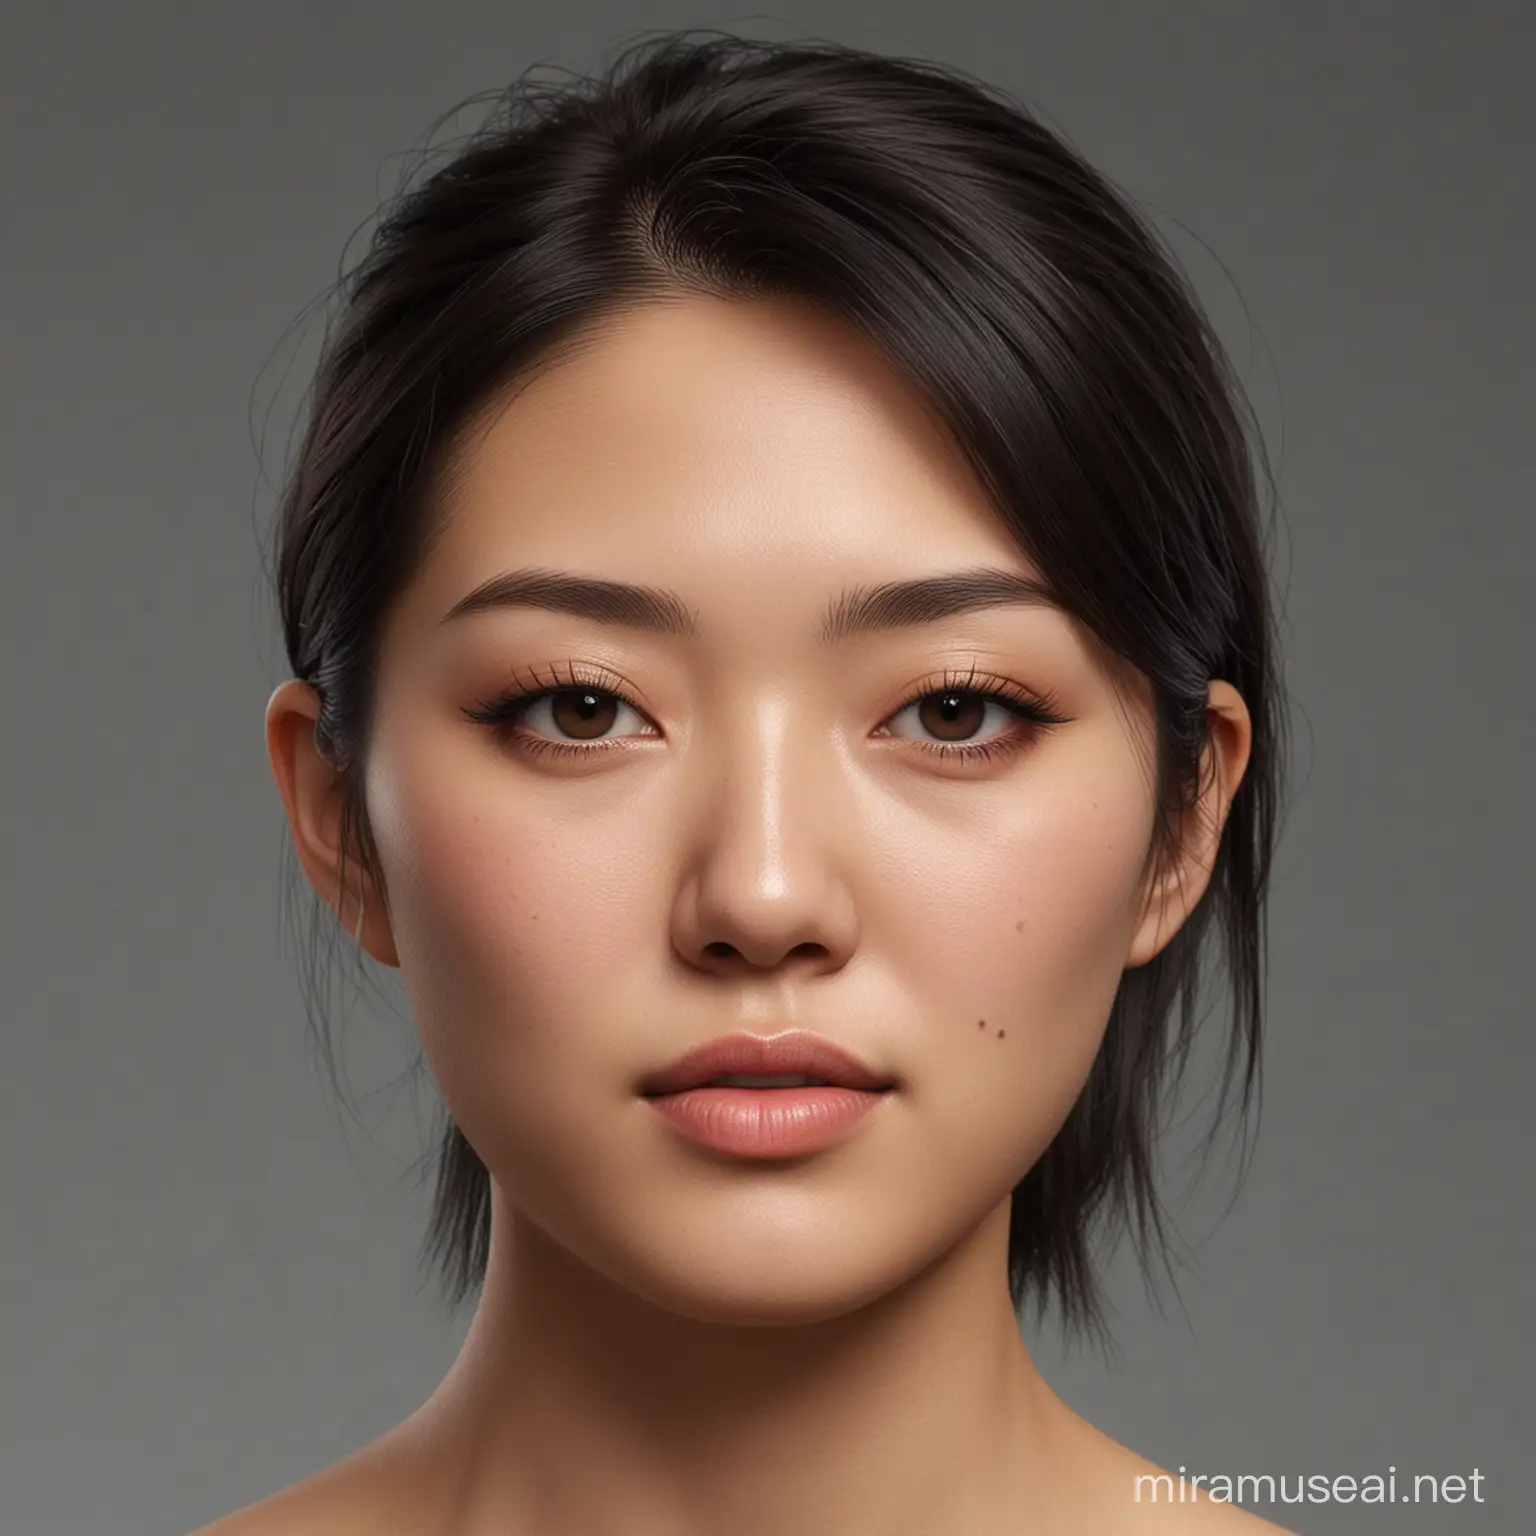 Asian Woman in Dynamic Profile Portrait with Realistic Features